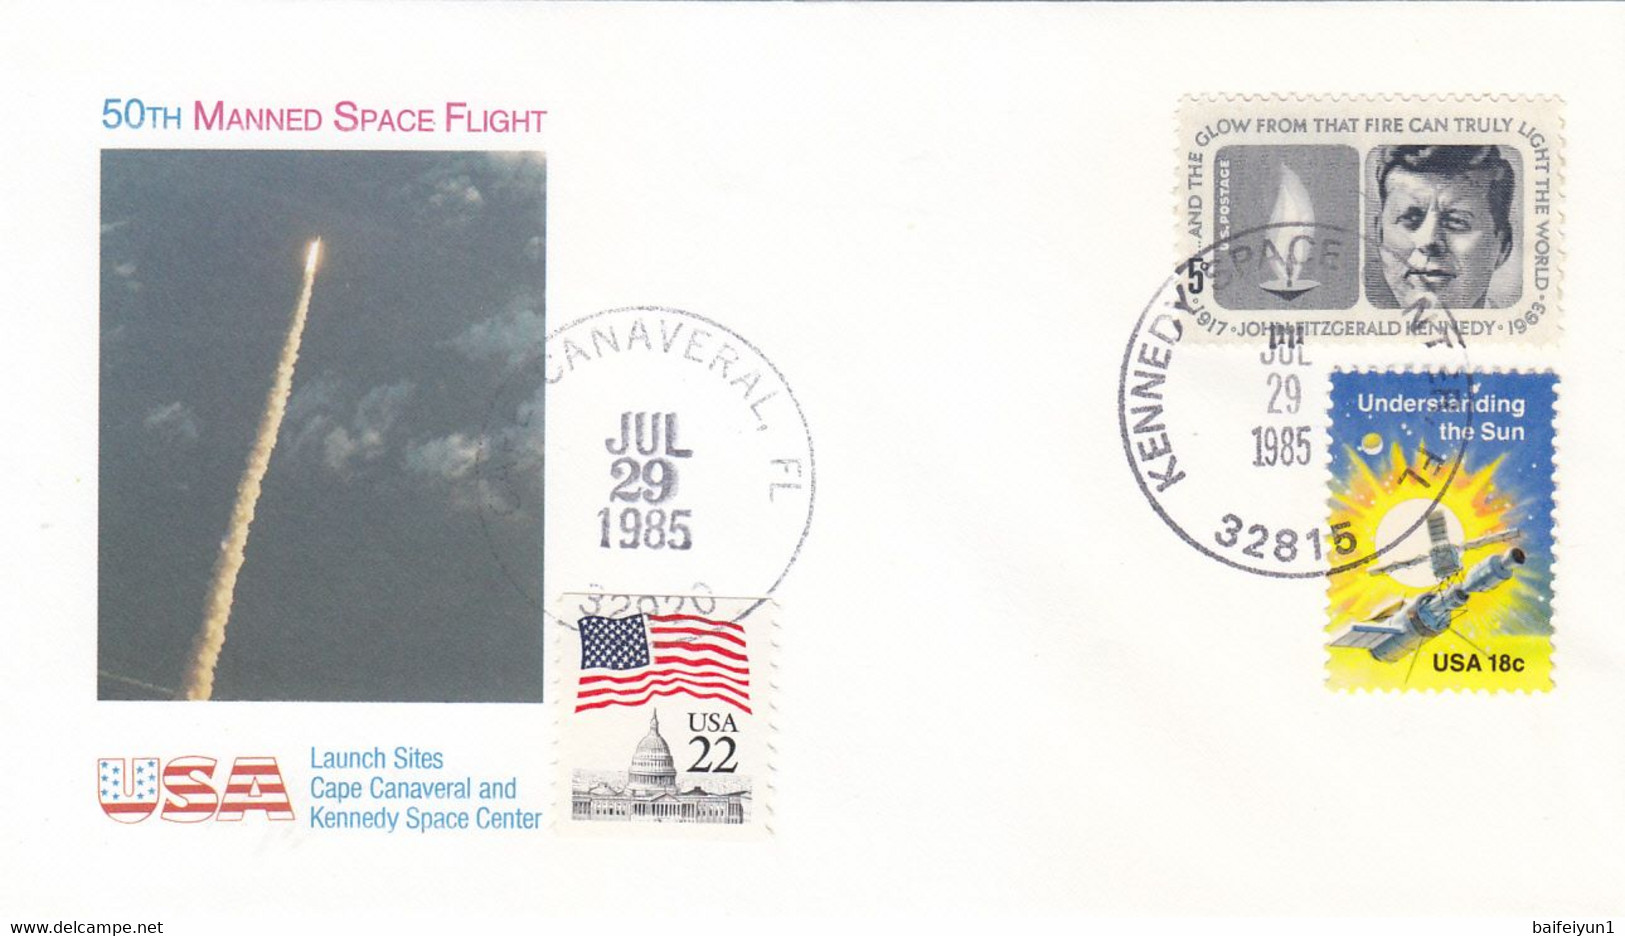 1985 USA  Space Shuttle Challenger STS-51F Mission And 50th Manned Space Flight  Commemorative Cover - North  America